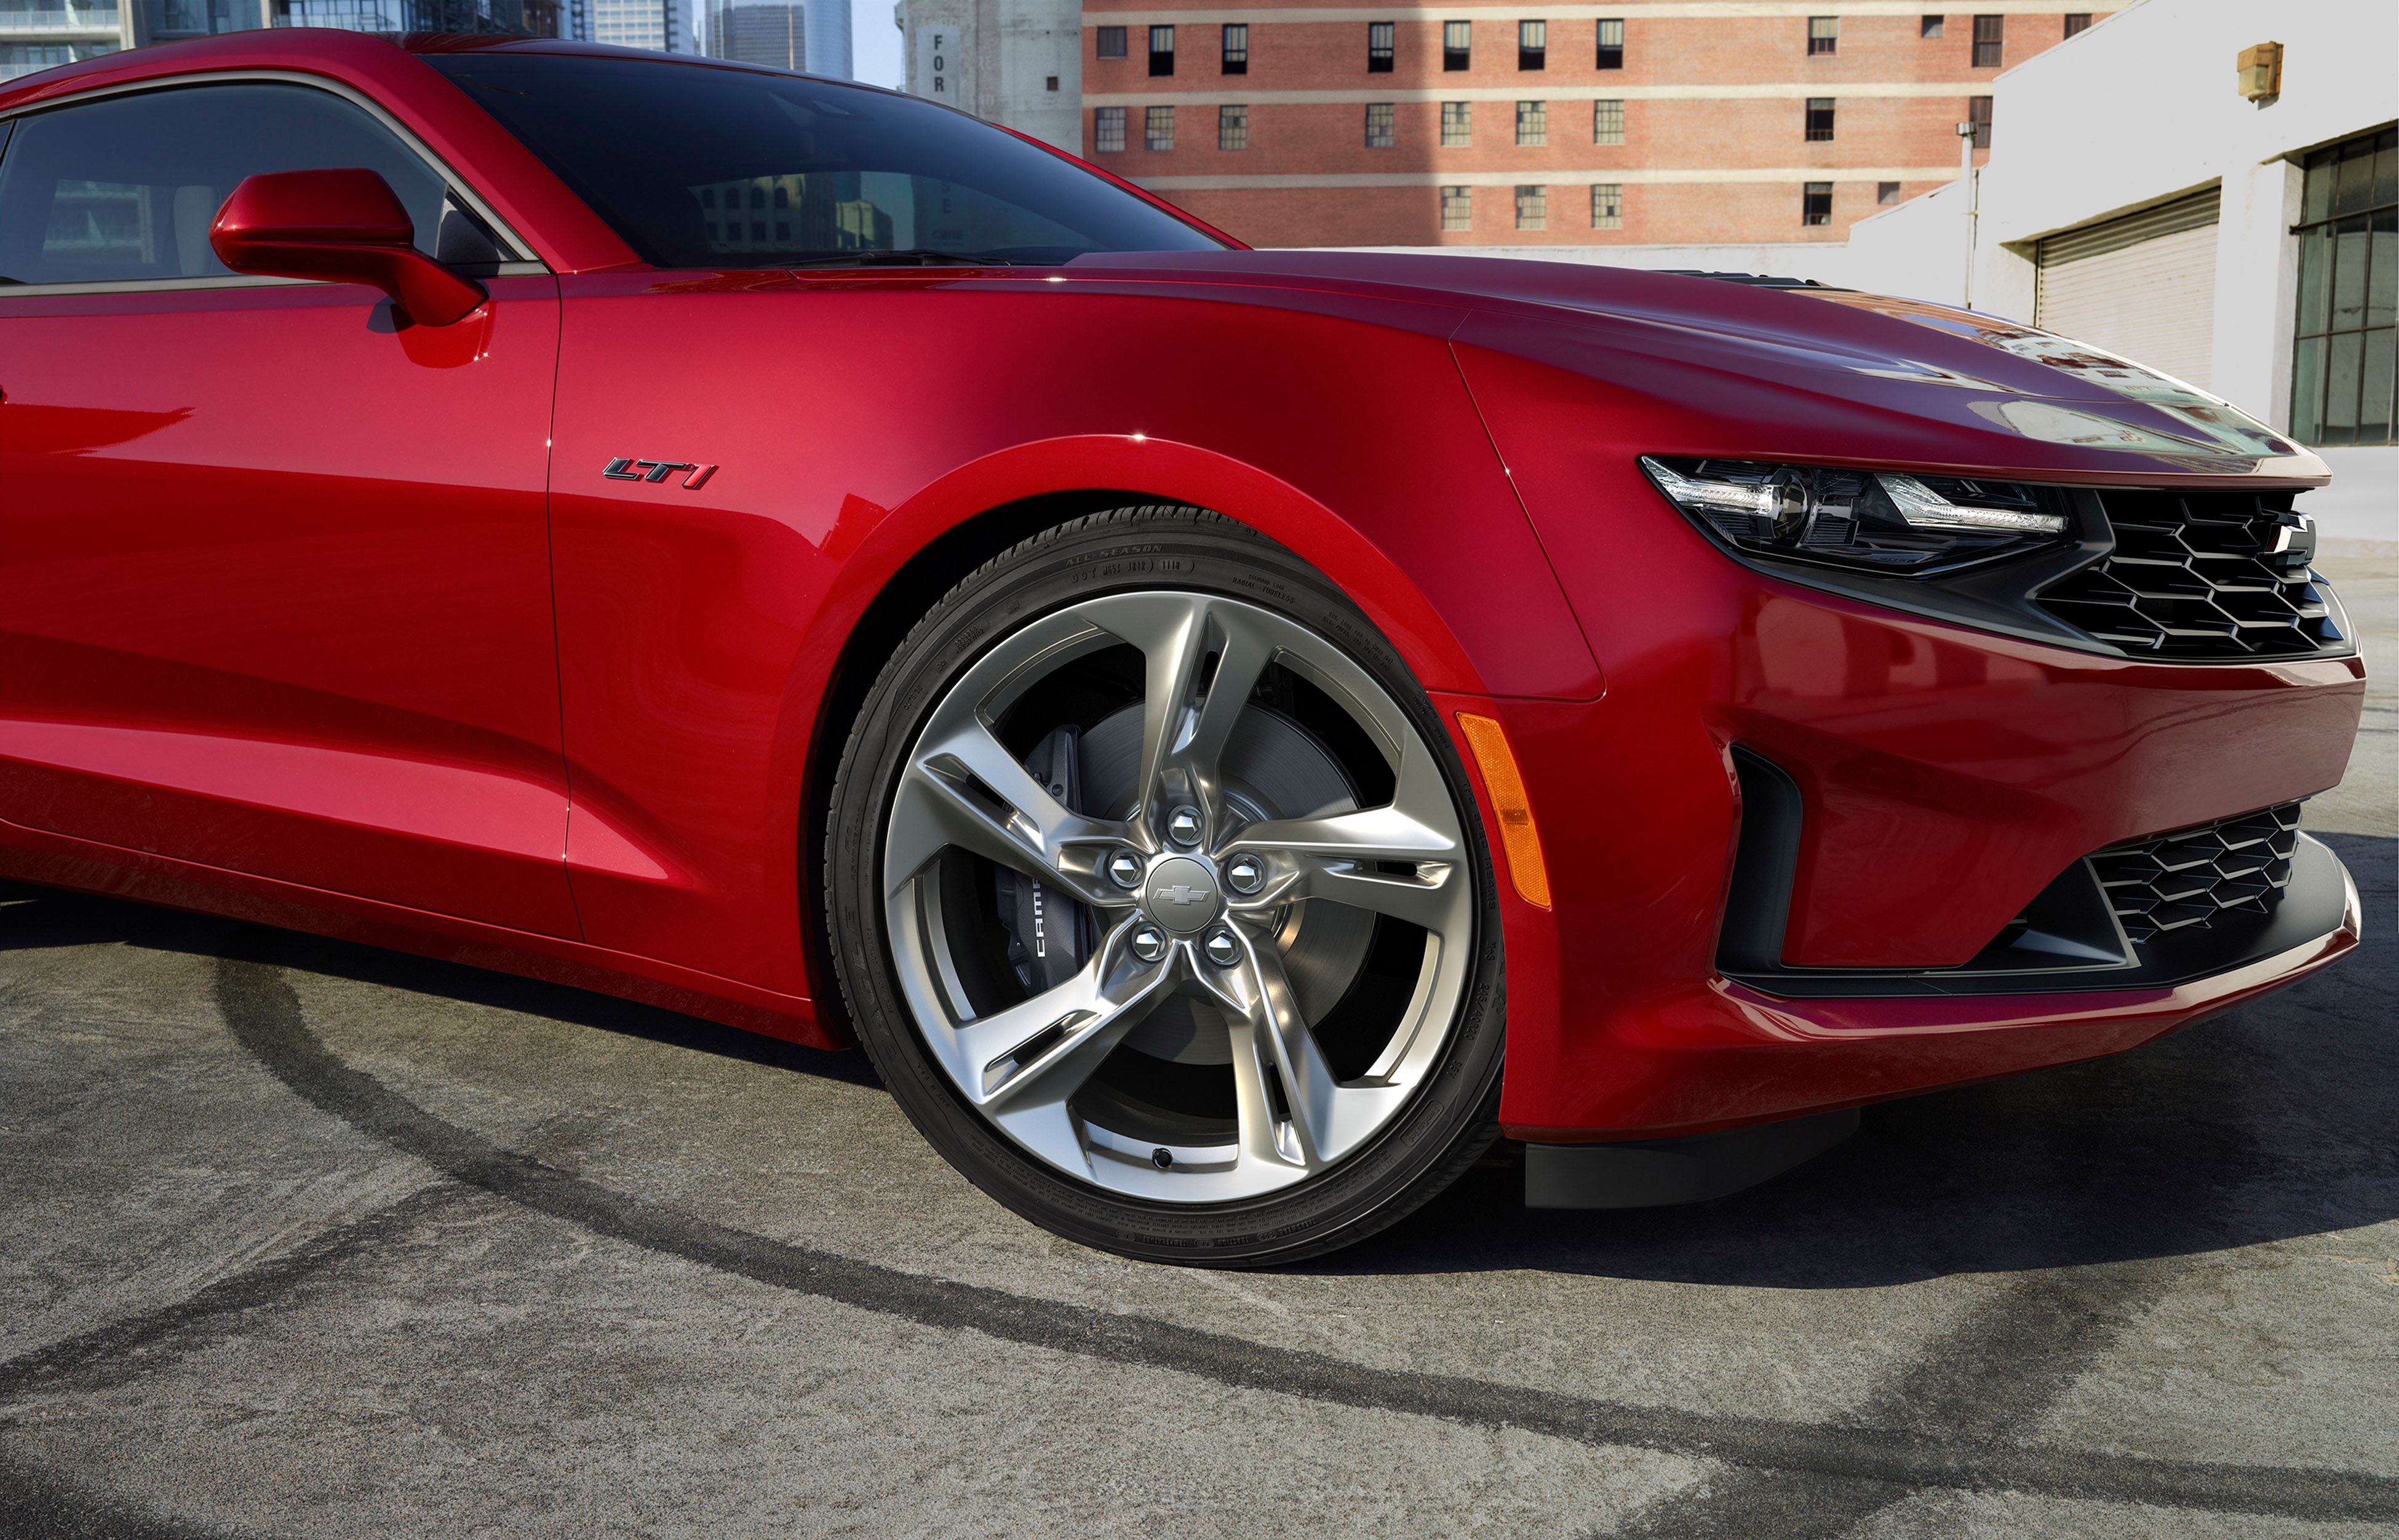 An all-new 2020 Camaro LT1 model adds a more affordable choice t